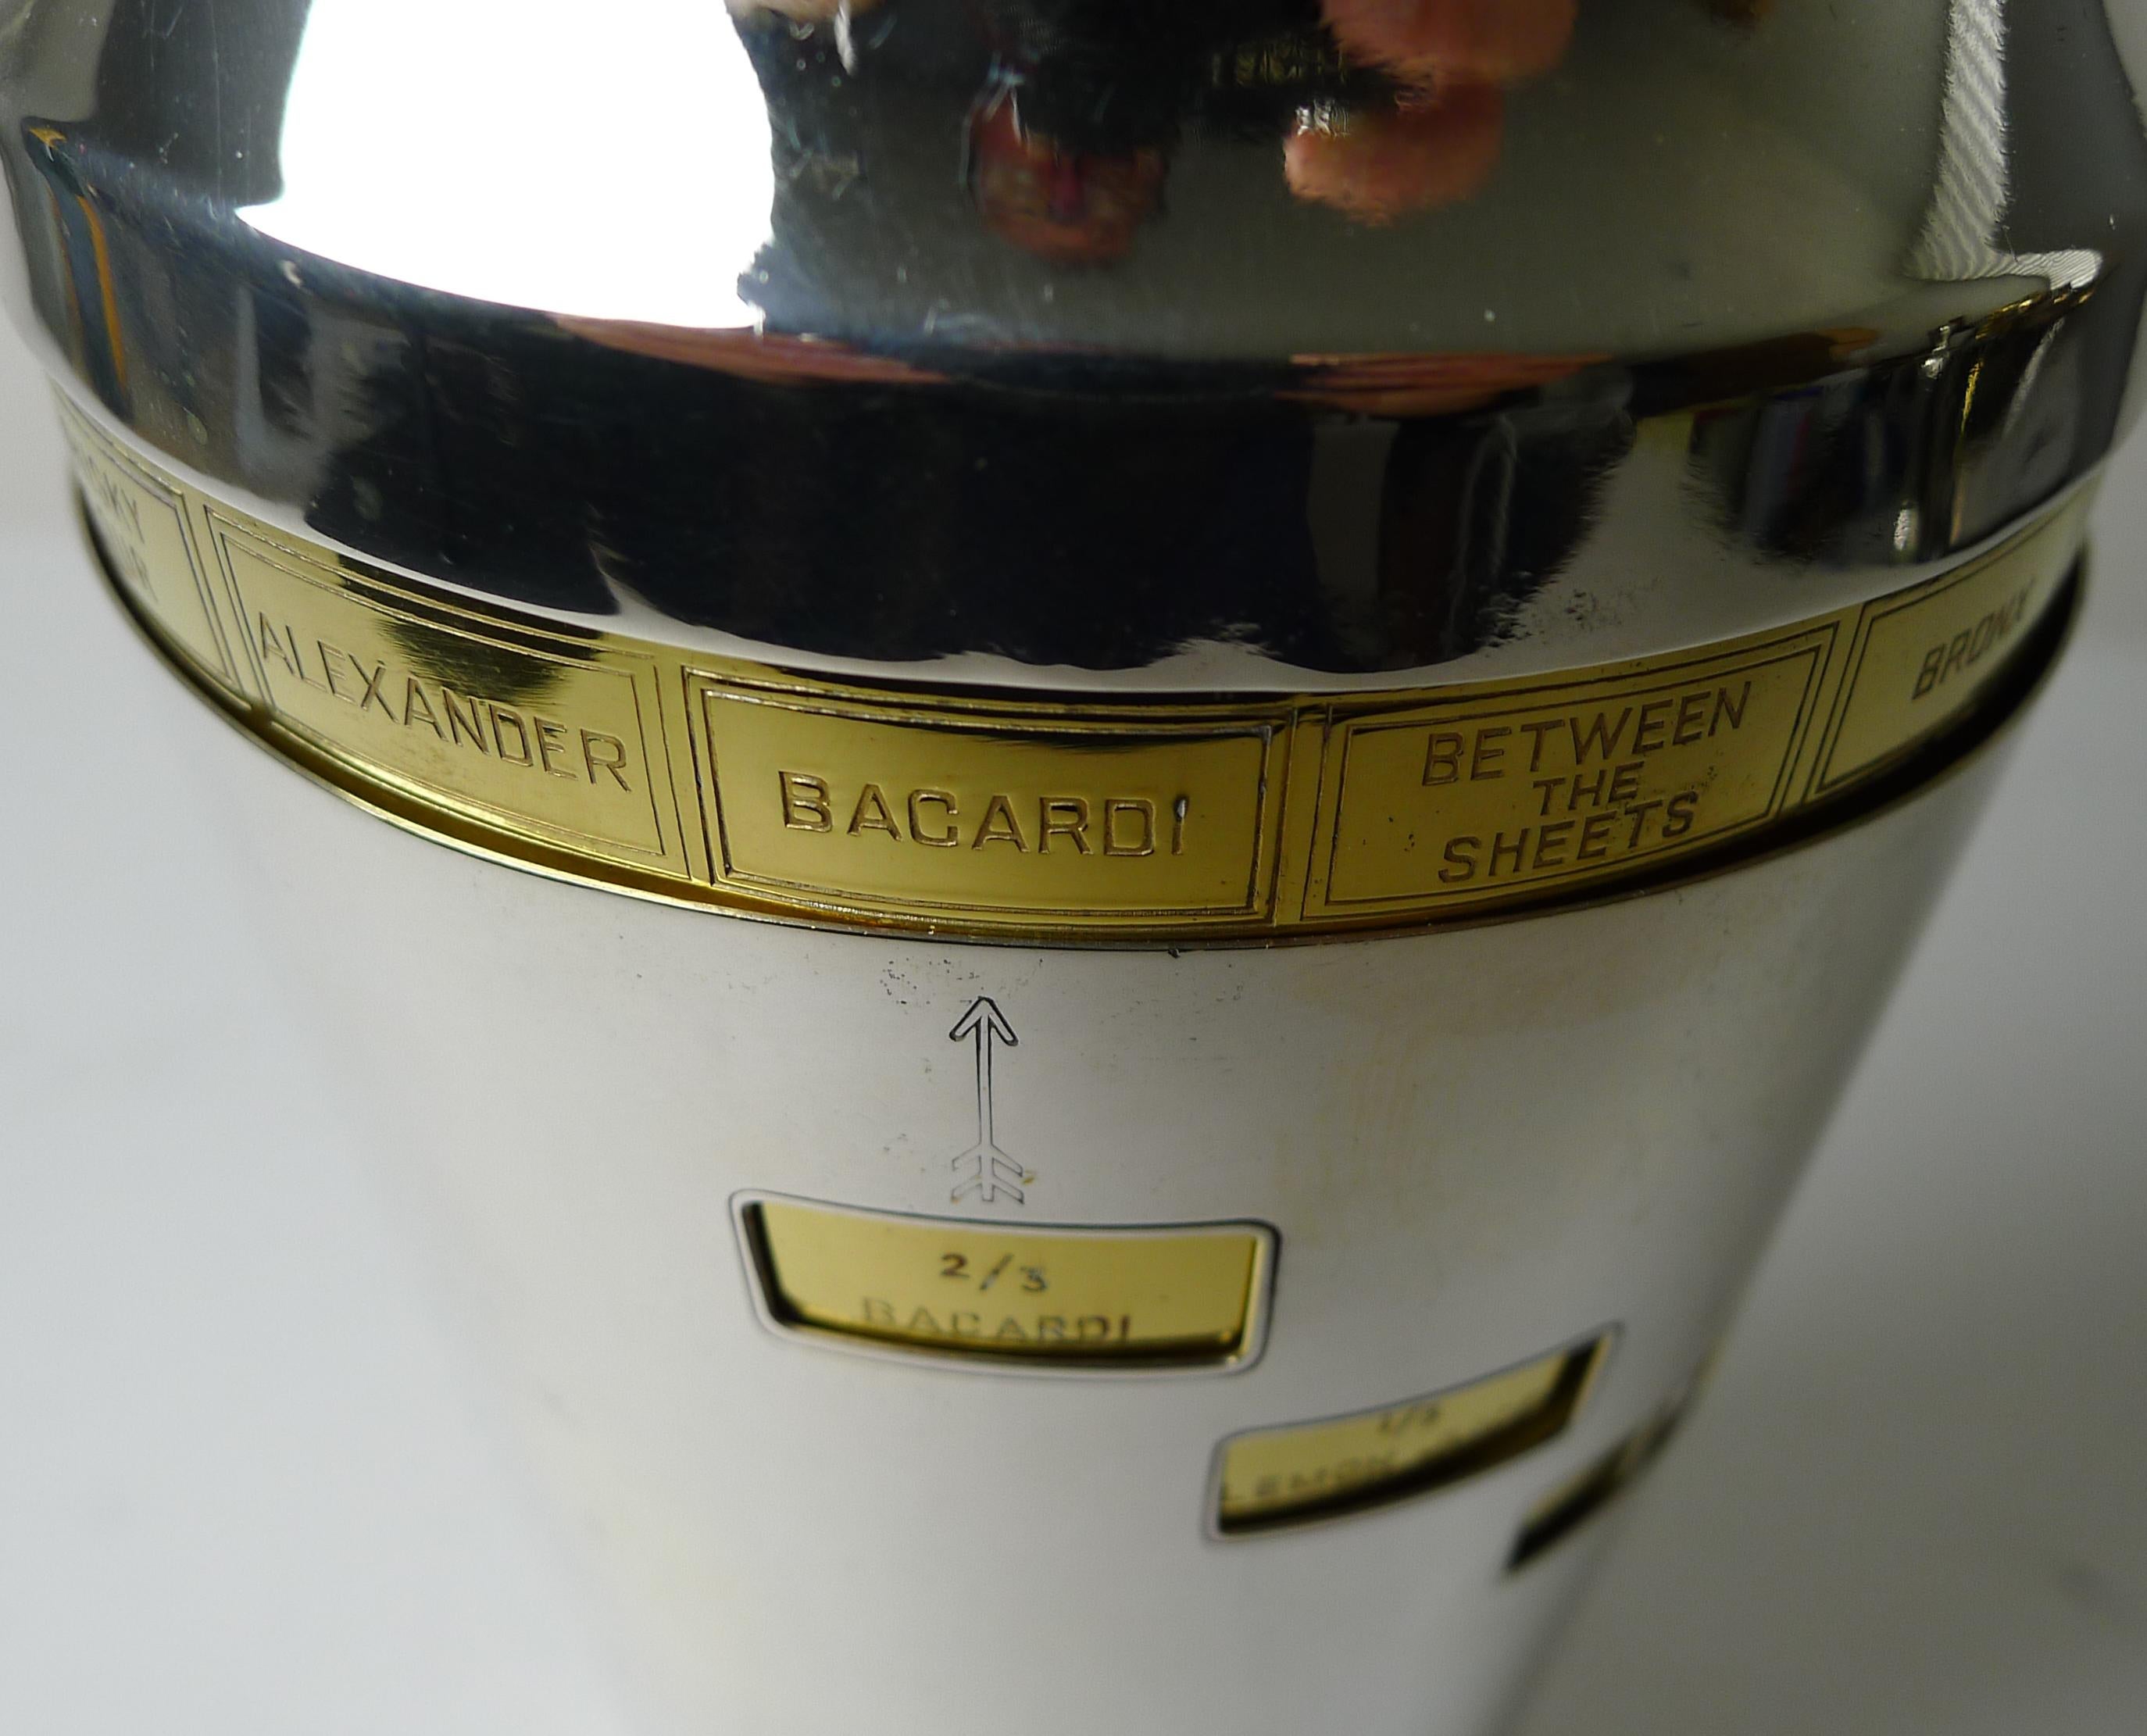 A magnificent original vintage 1930's recipe cocktail shaker just back from our silversmith having had all the gold and silver plating professionally restored and polished to create an outstanding example.

The shaker incorporates a gilded inner